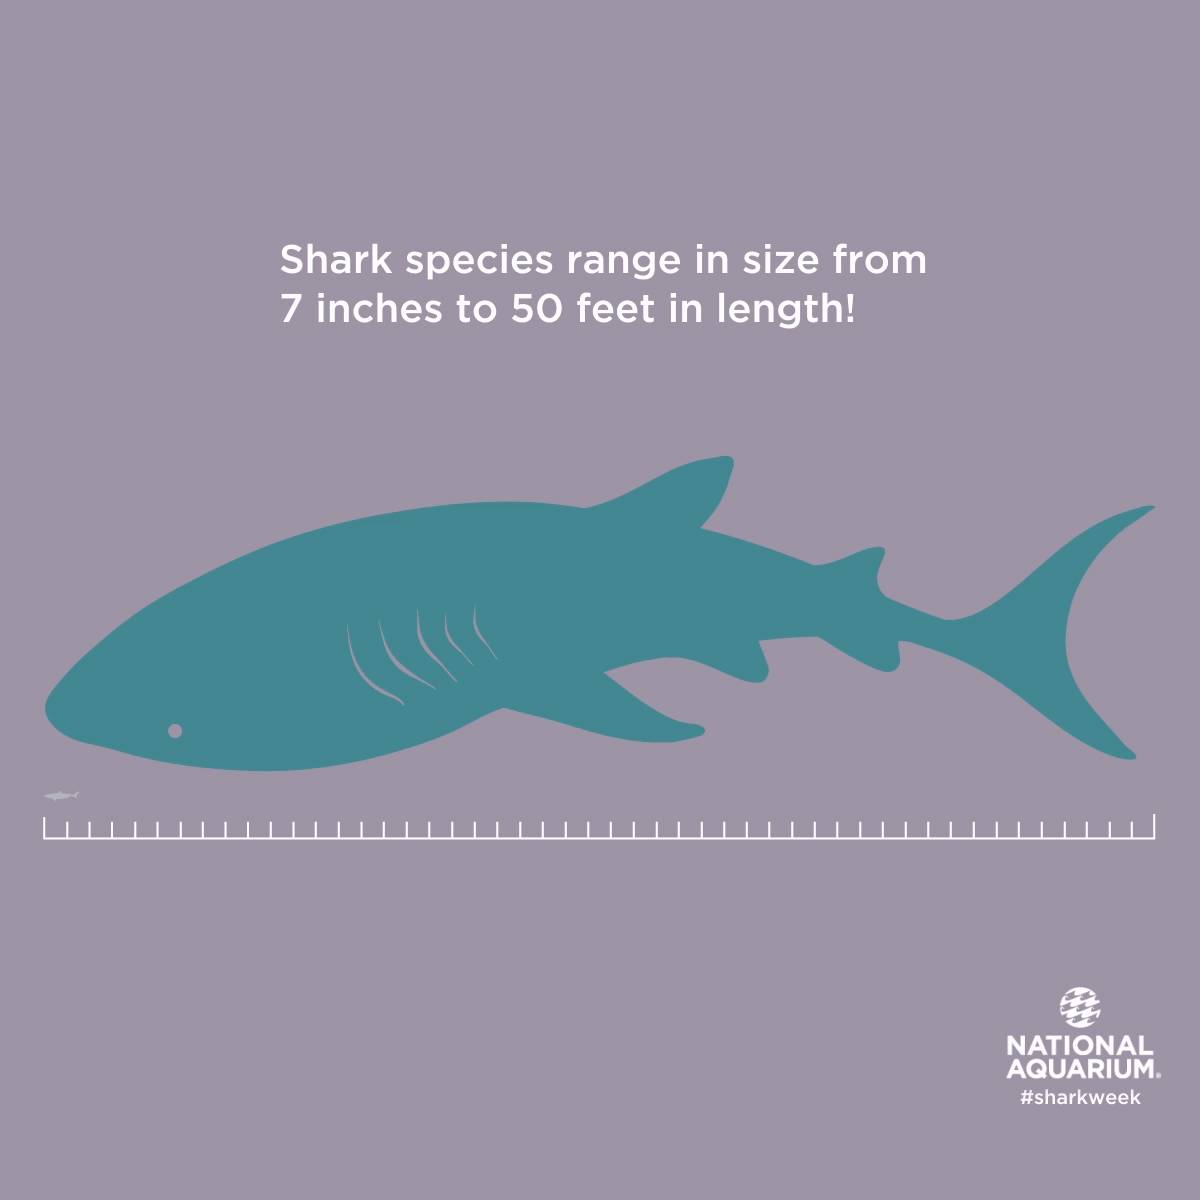 Shark species range in size from 7 inches to 30 feet in length.